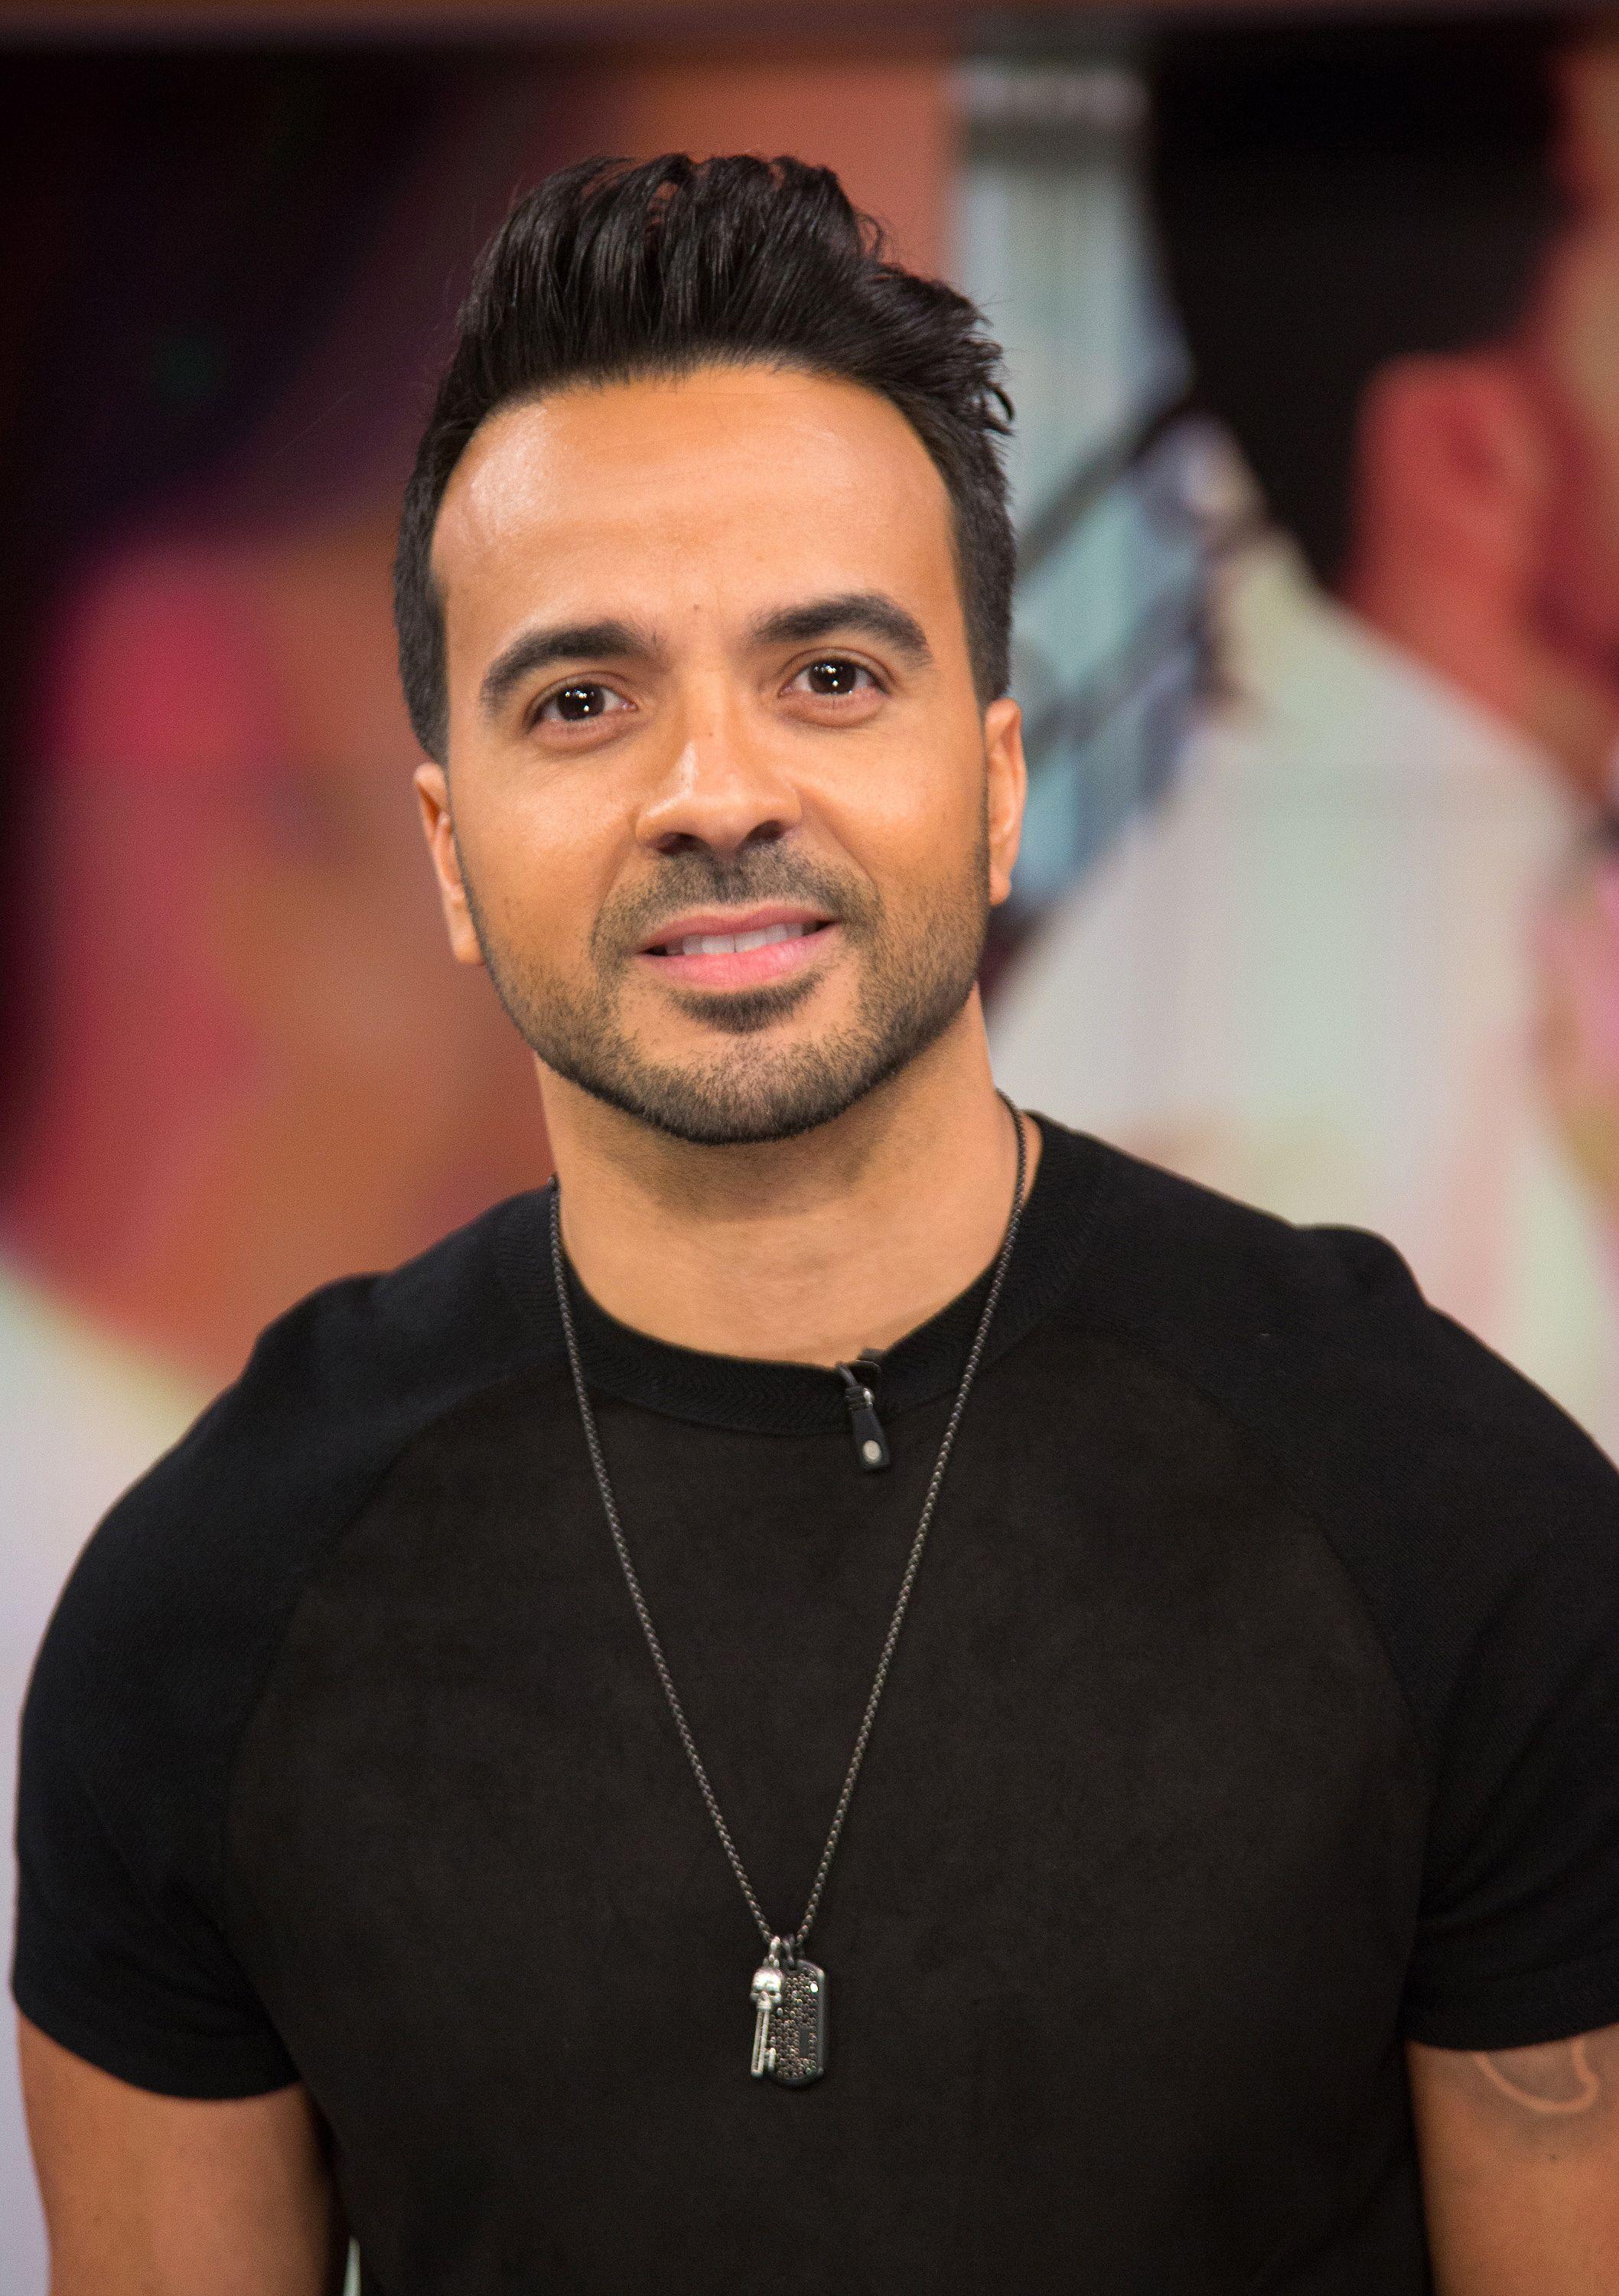 Despacito' Singer Luis Fonsi Breaks His Silence About Justin